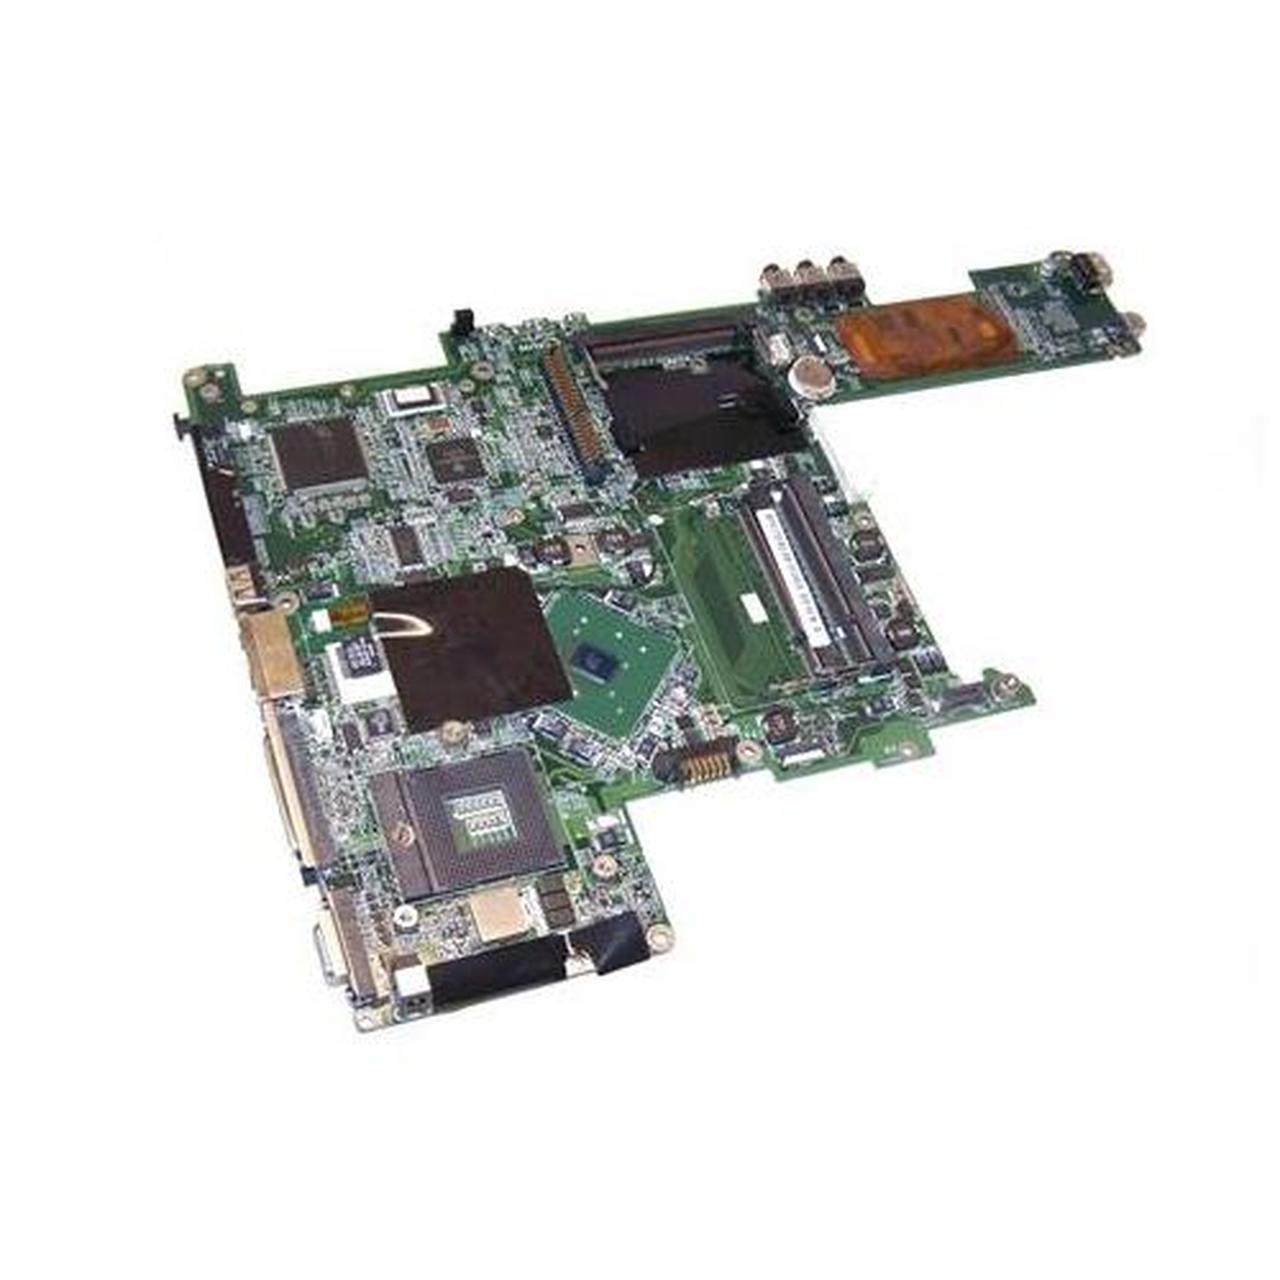 682175-501 HP System Board (Motherboard) for Pavilion dv6-7000/dv6t-7000 Notebook Series (Refurbished) PART - Click Image to Close